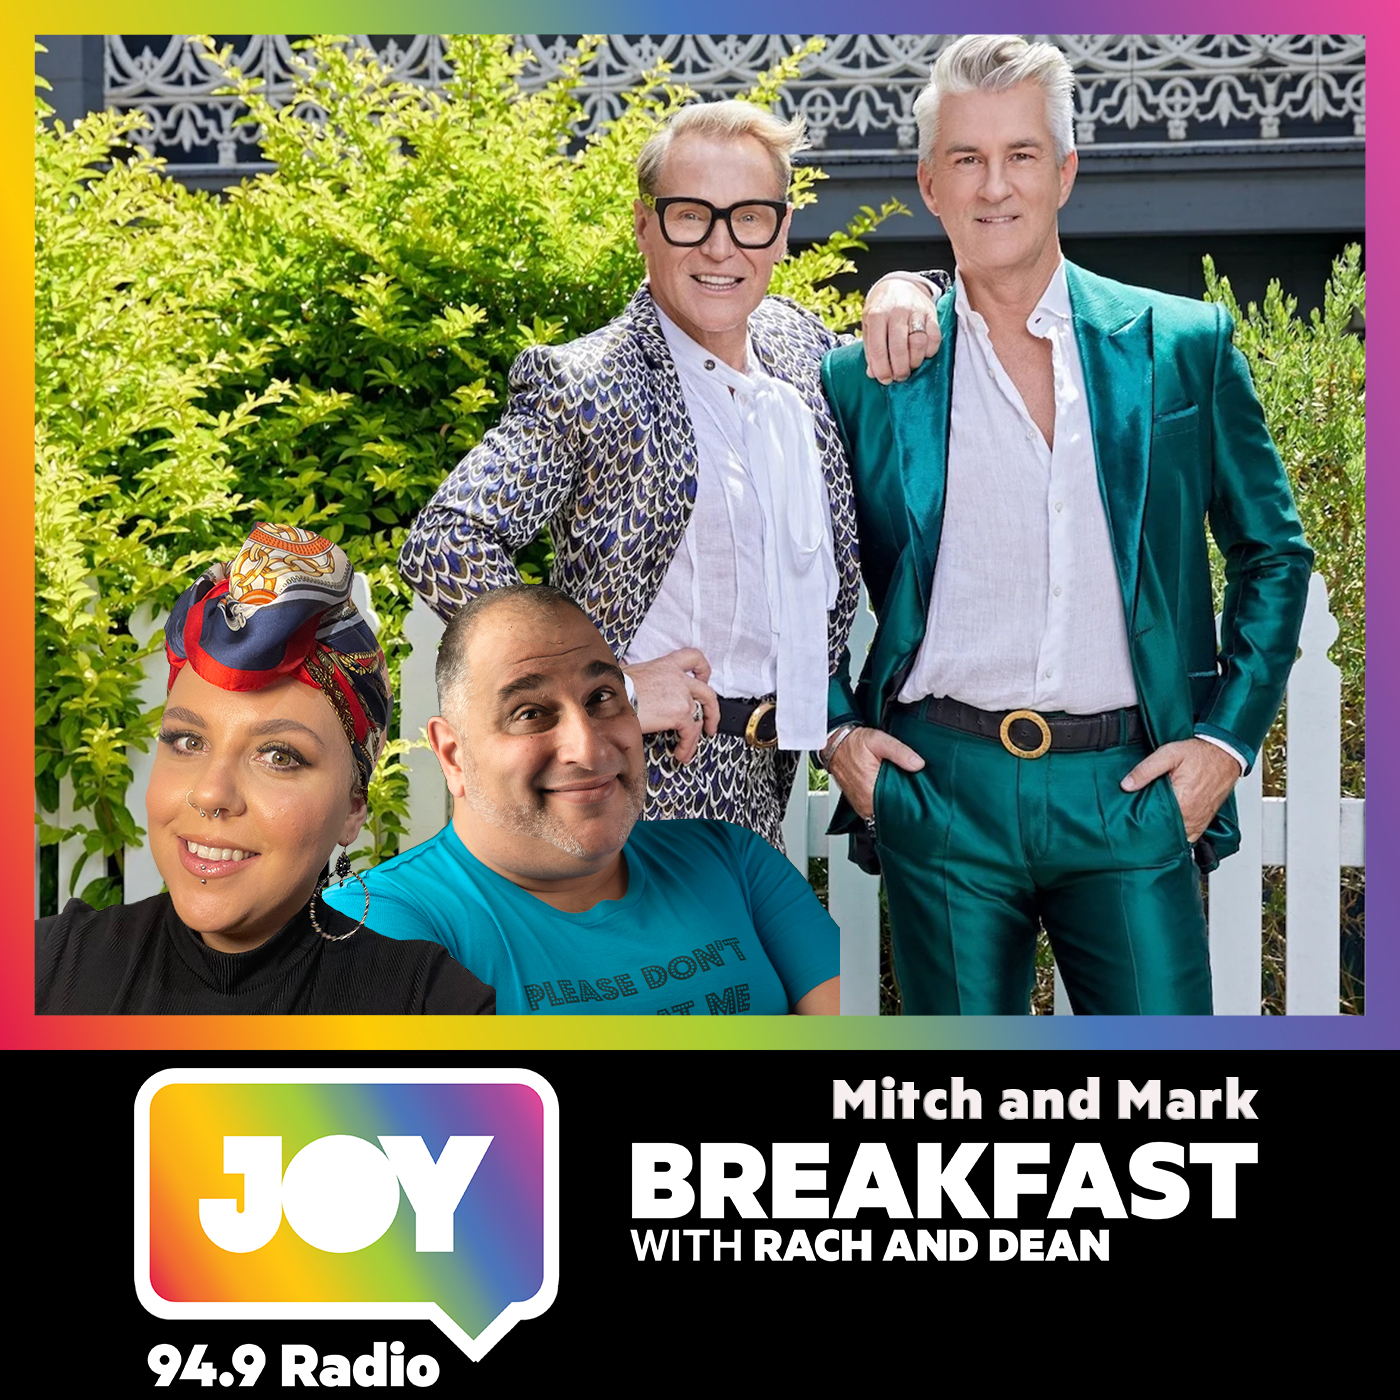 Find your dream home with Mitch & Mark’s new TV show